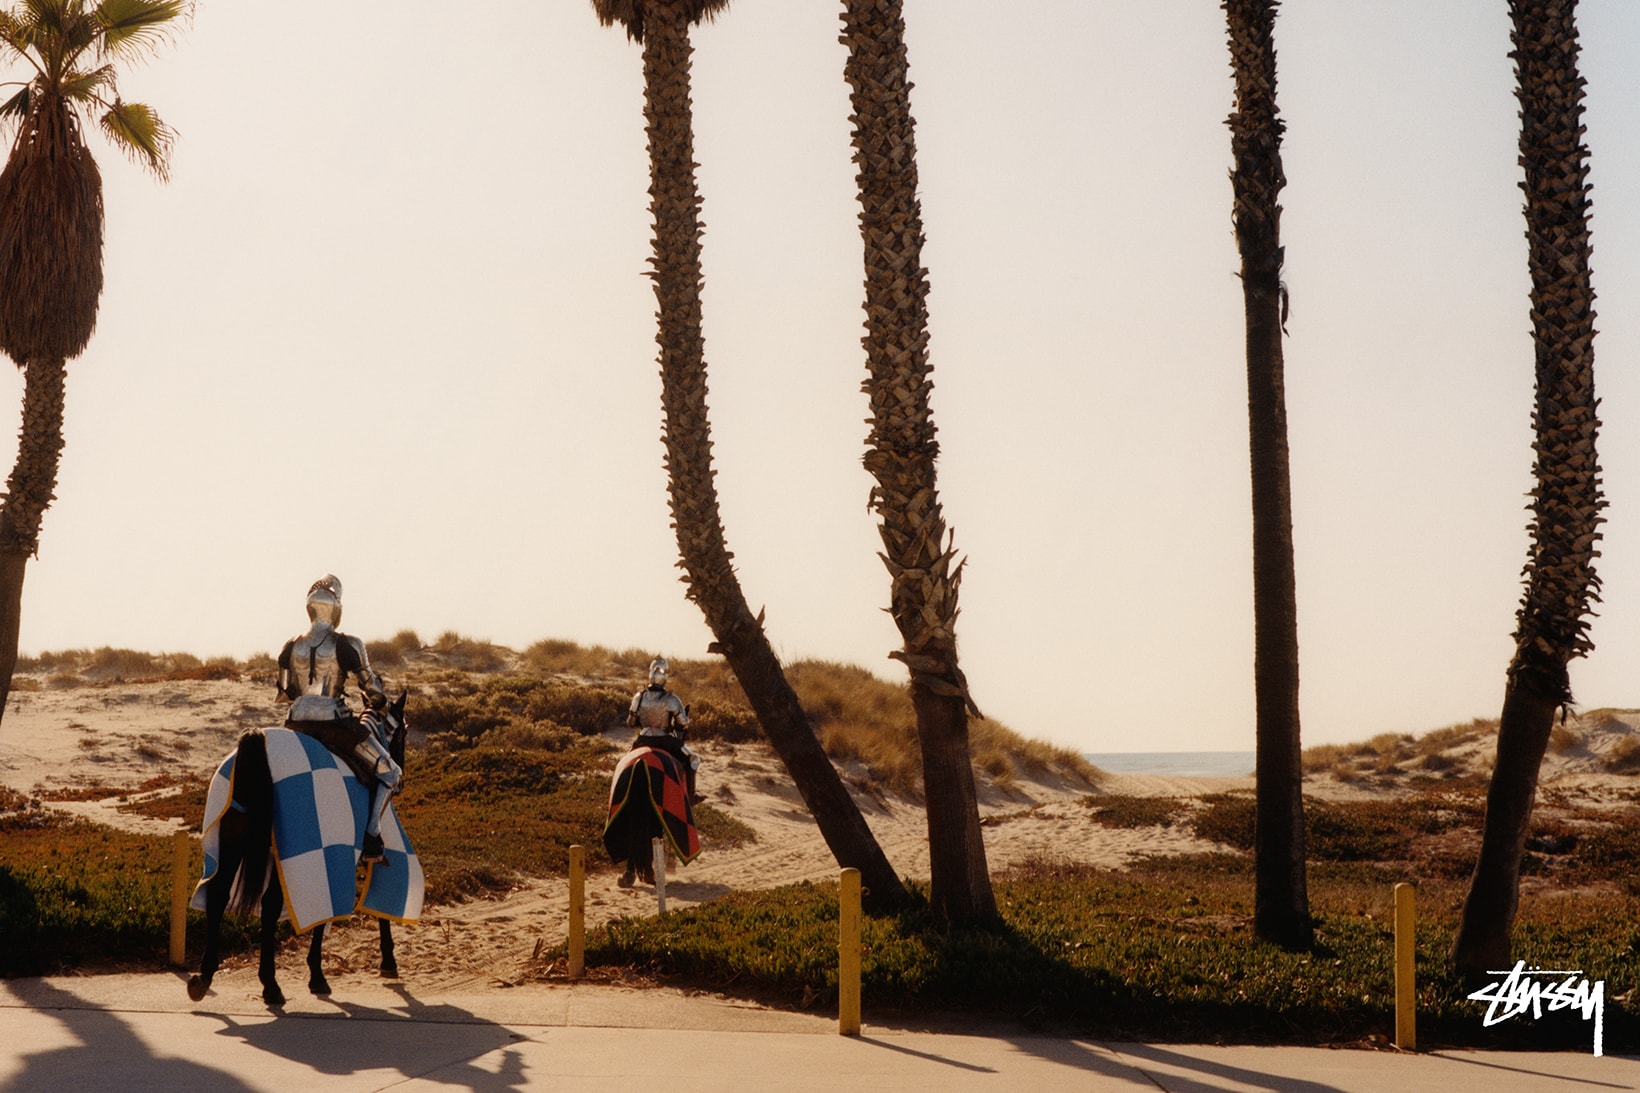 stussy spring 2020 californian knights campaign joust duel surrealism